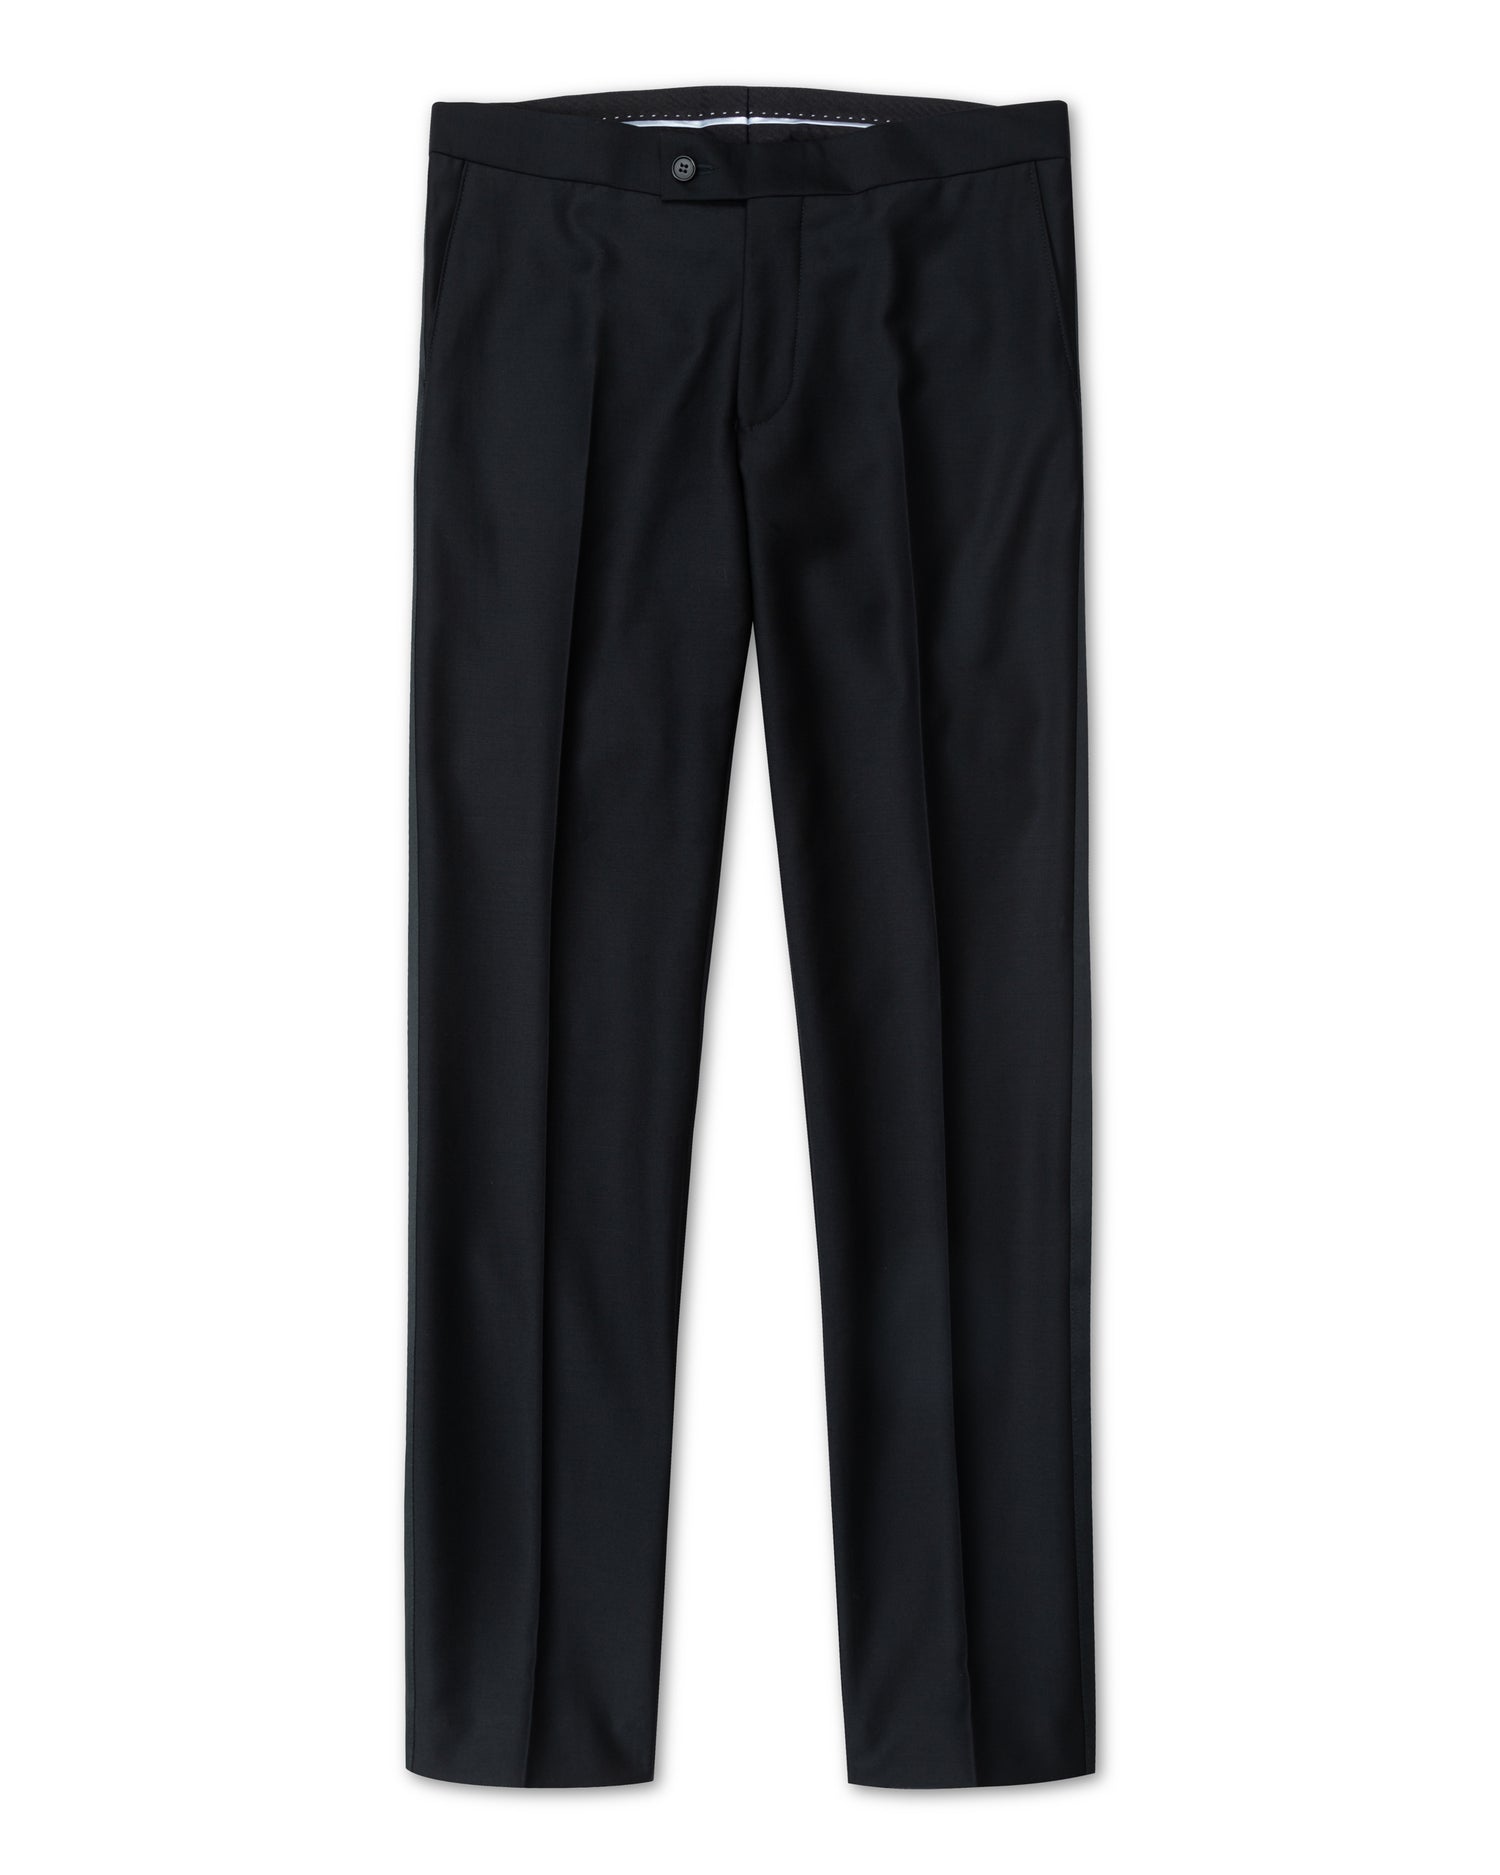 Modern fit Trousers for Tail Coat and Tuxedo (4353145176126)